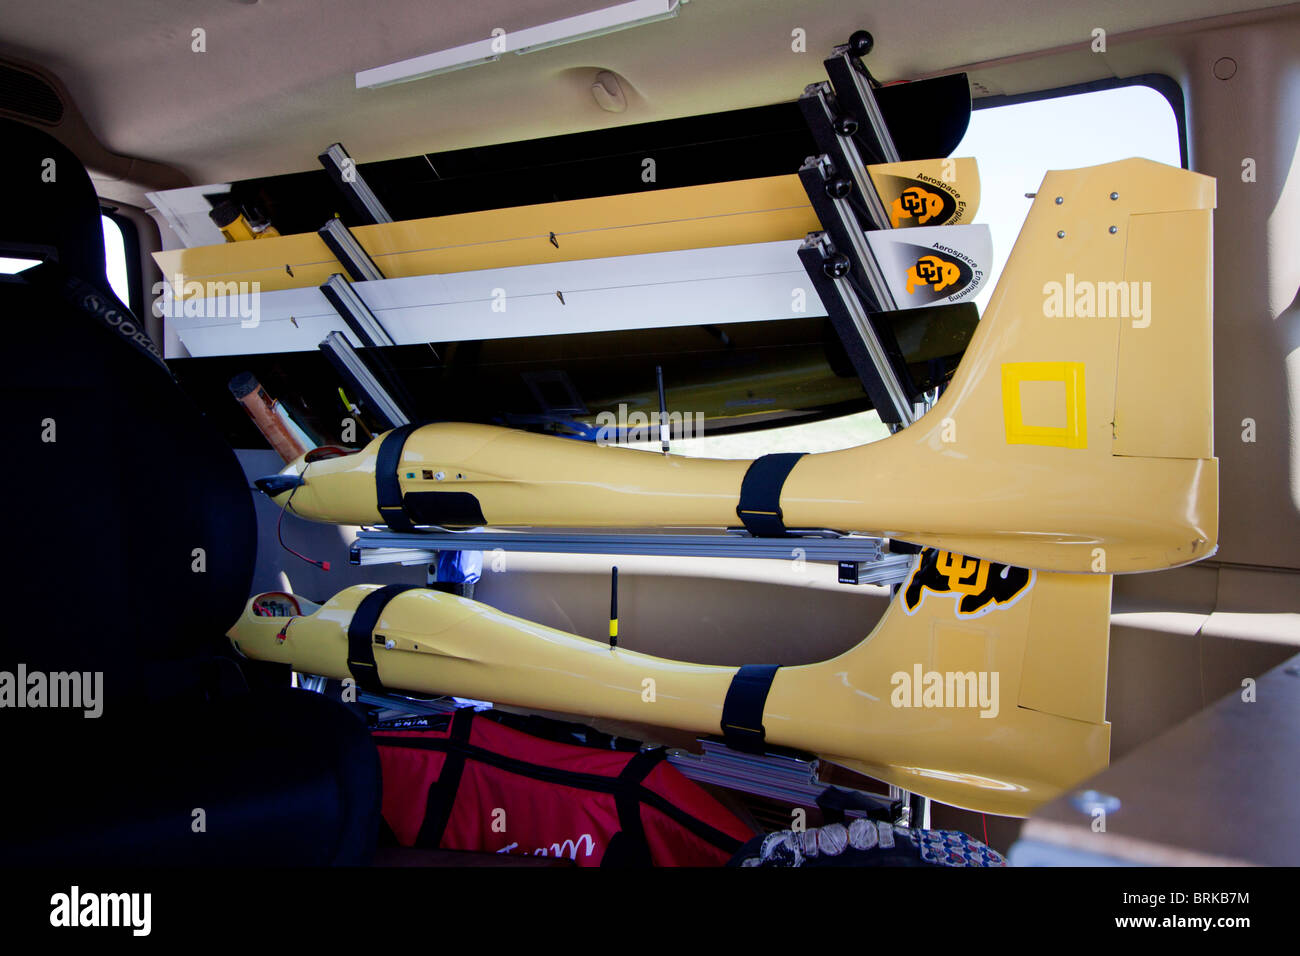 Unmanned aerial vehicles stowed inside a van wait for participaton in Project Vortex 2, May 21, 2010 Stock Photo